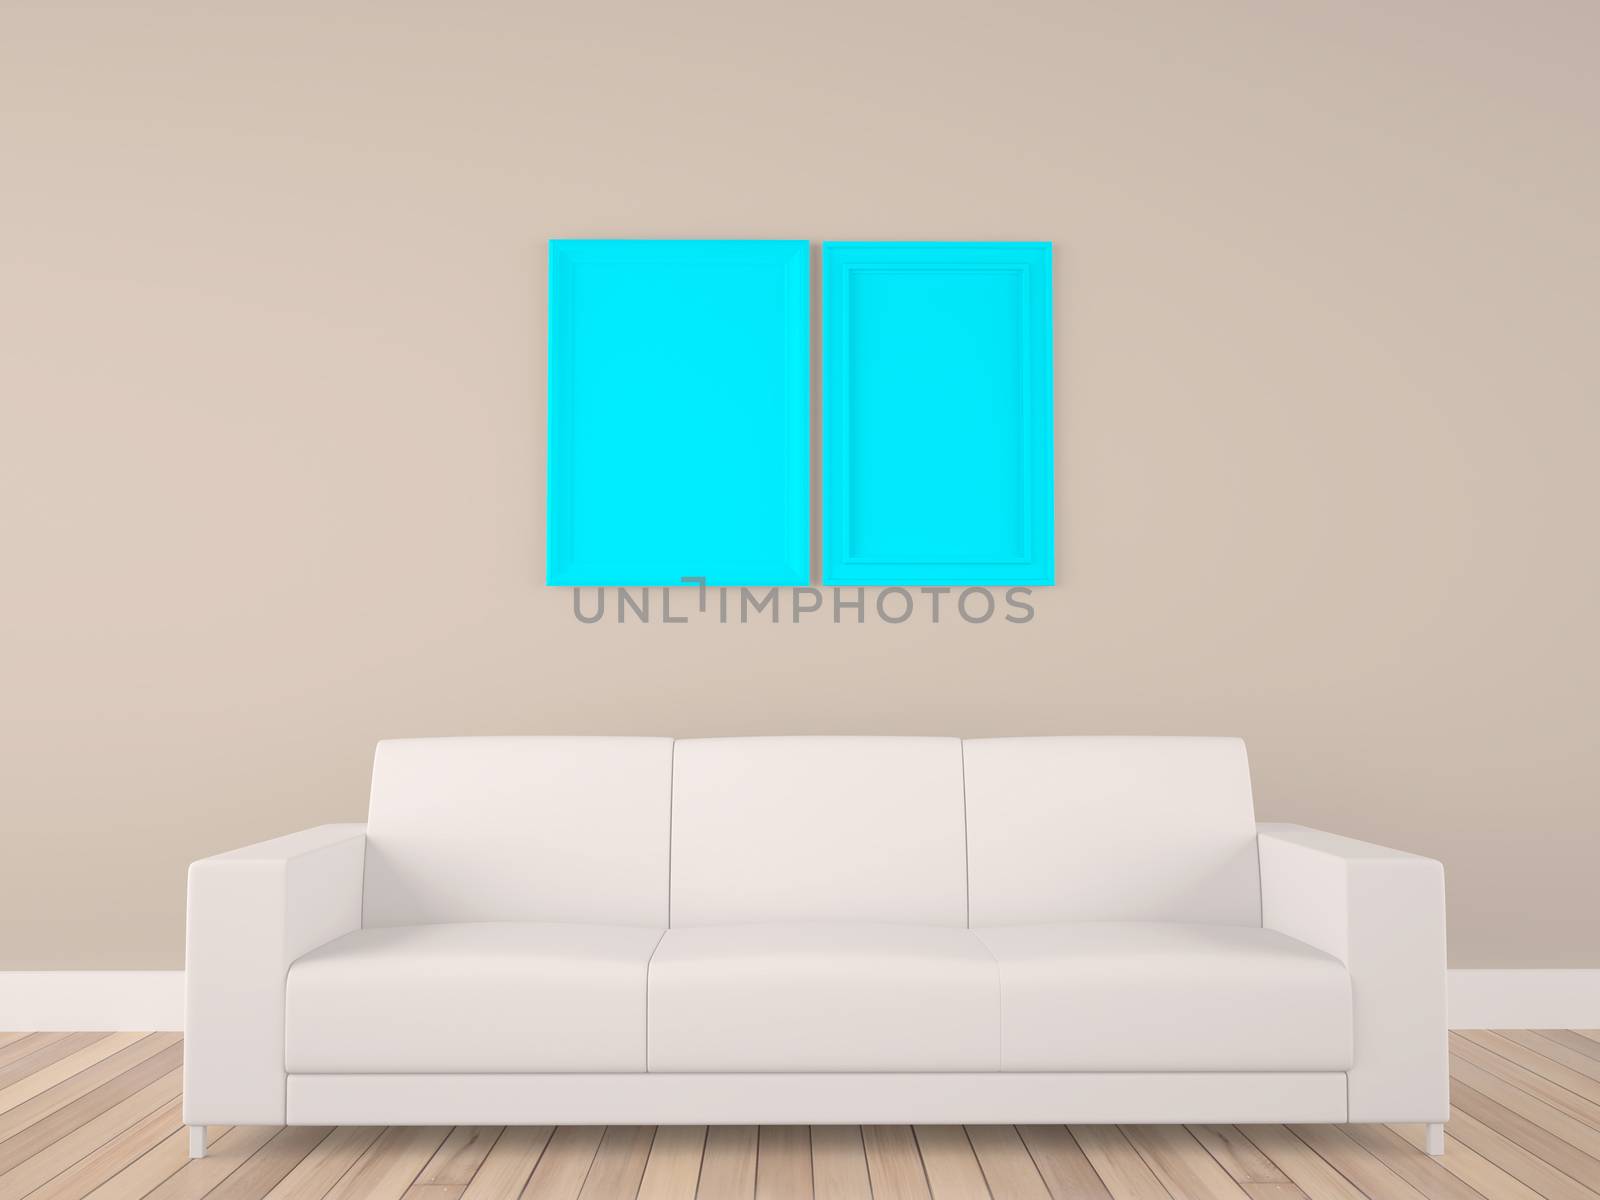 blue empty frame with white sofa in room